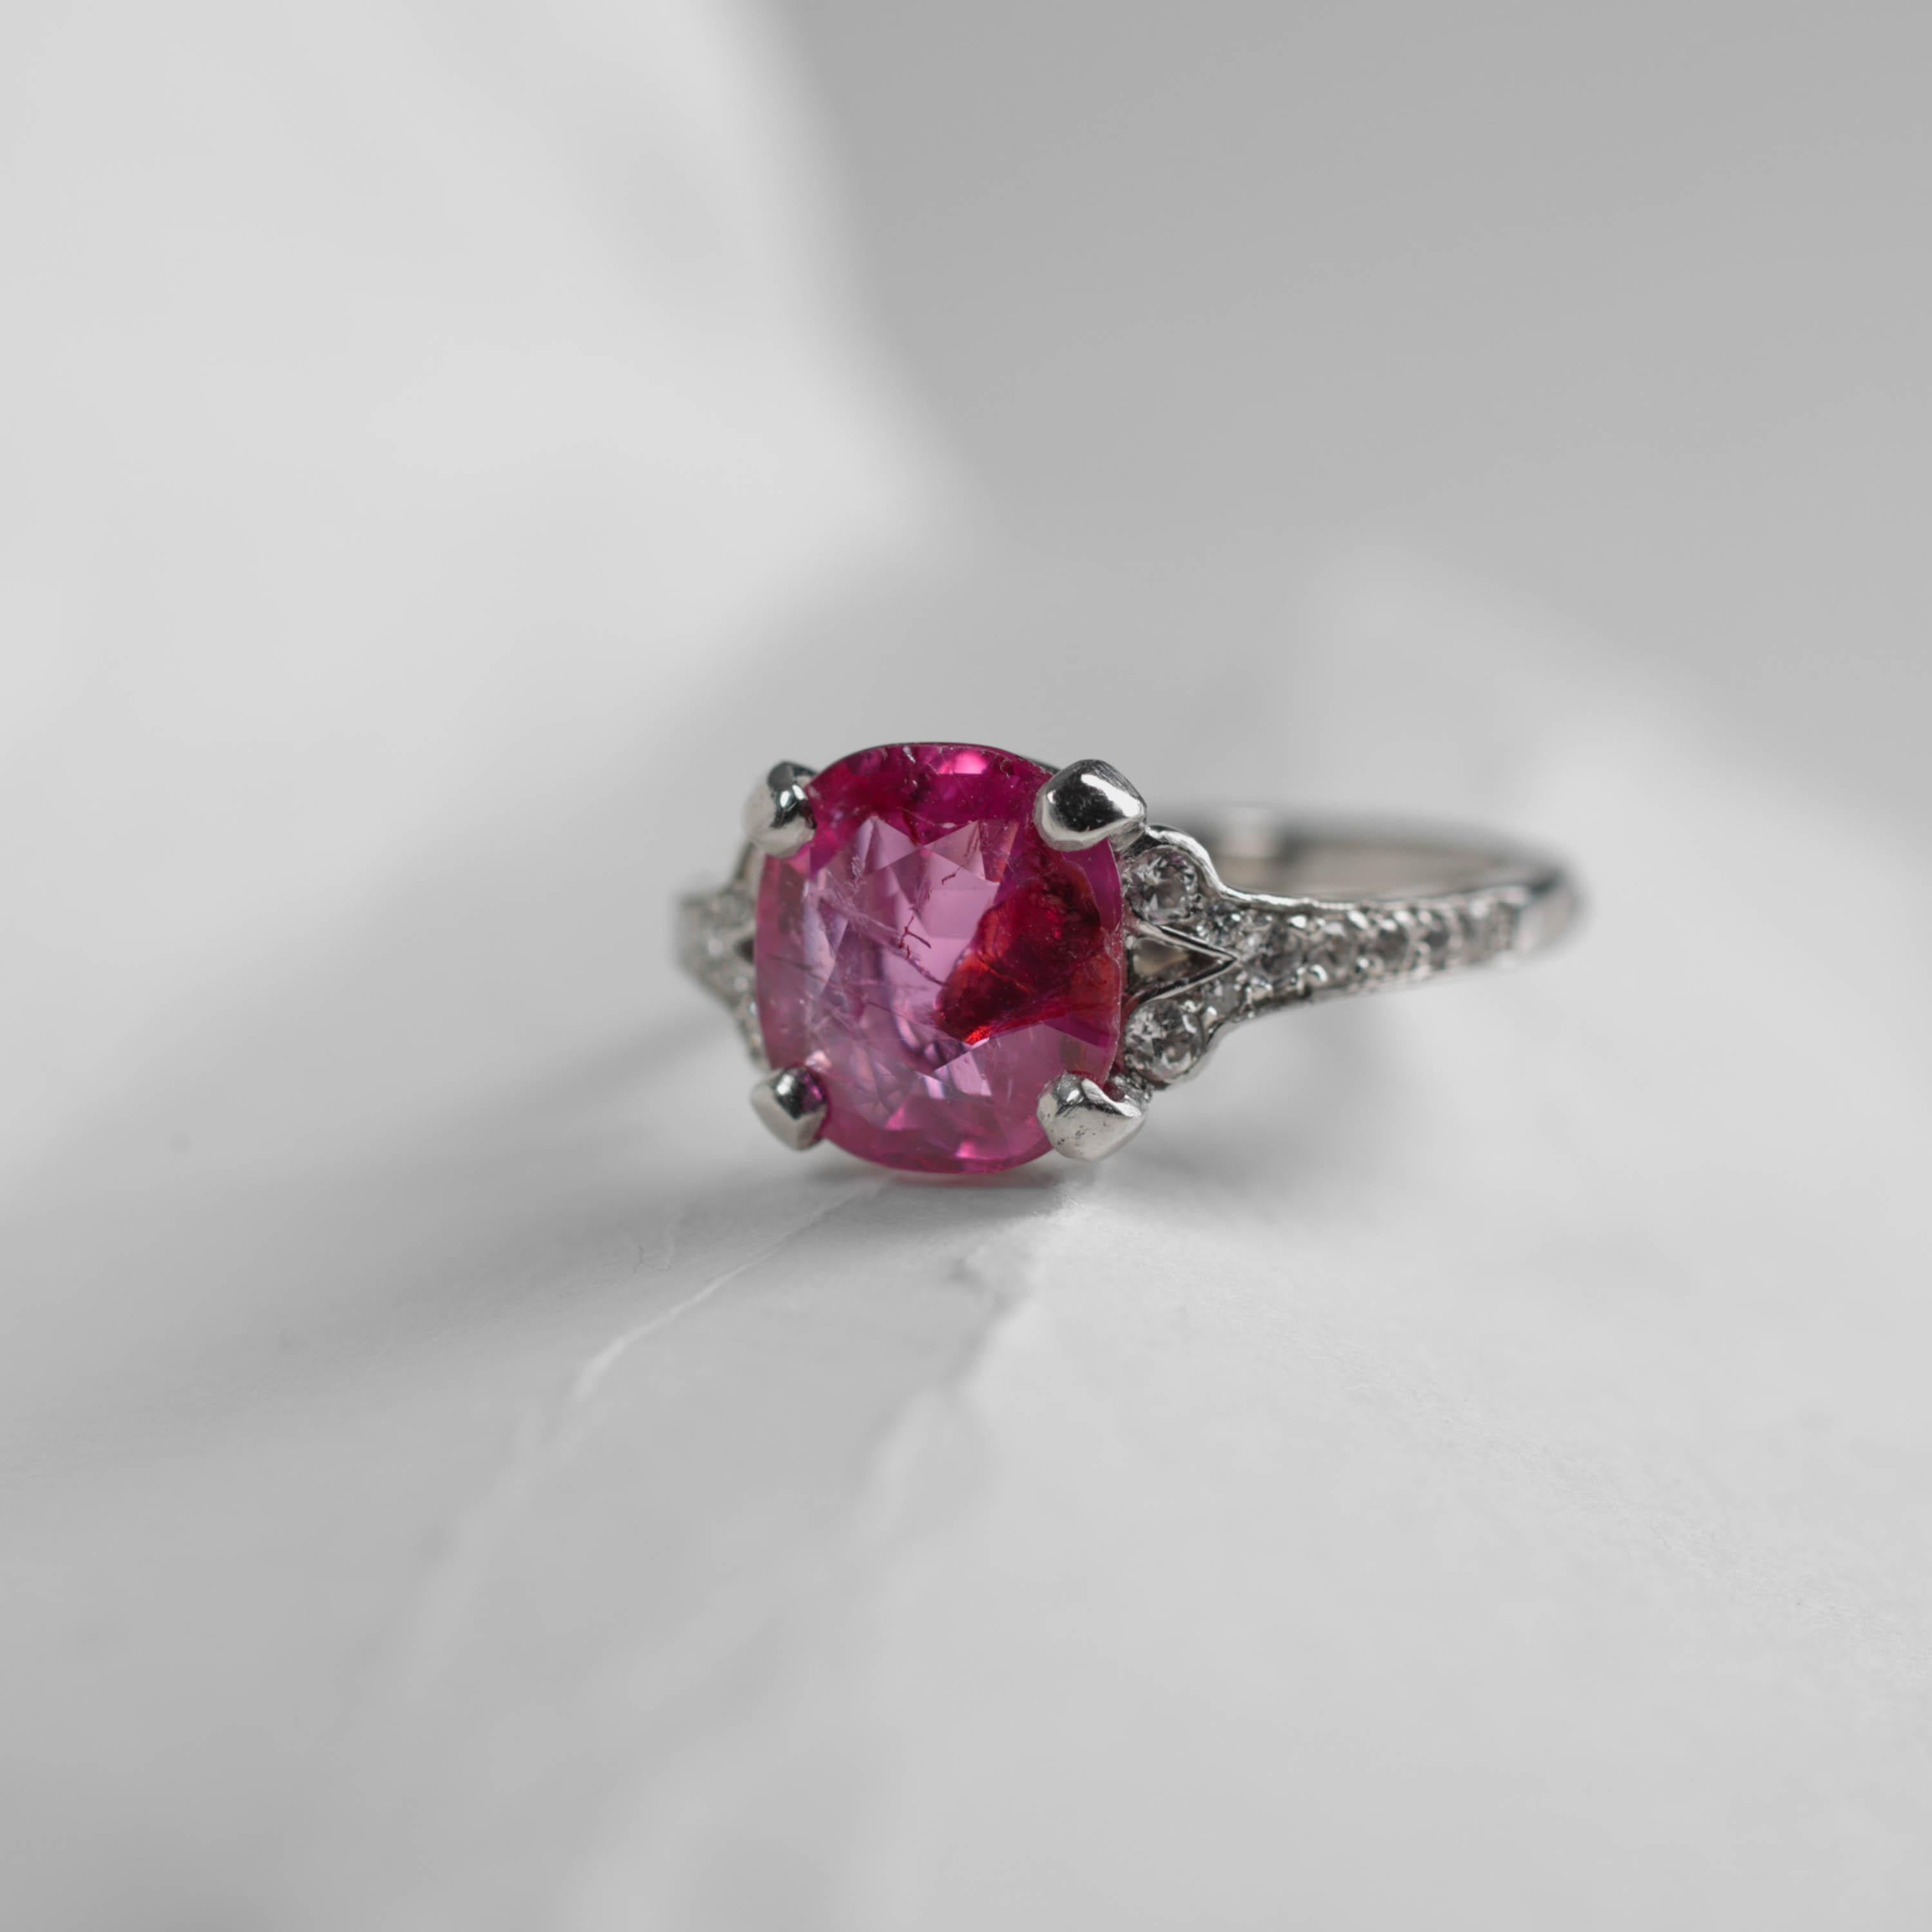 A spectacular -and exceedingly rare- certified natural and unheated Burmese ruby weighing just over three carats shines like a beacon from within the four-prong French mounting. Rubies over one carat are rare, and Burmese rubies are the standard